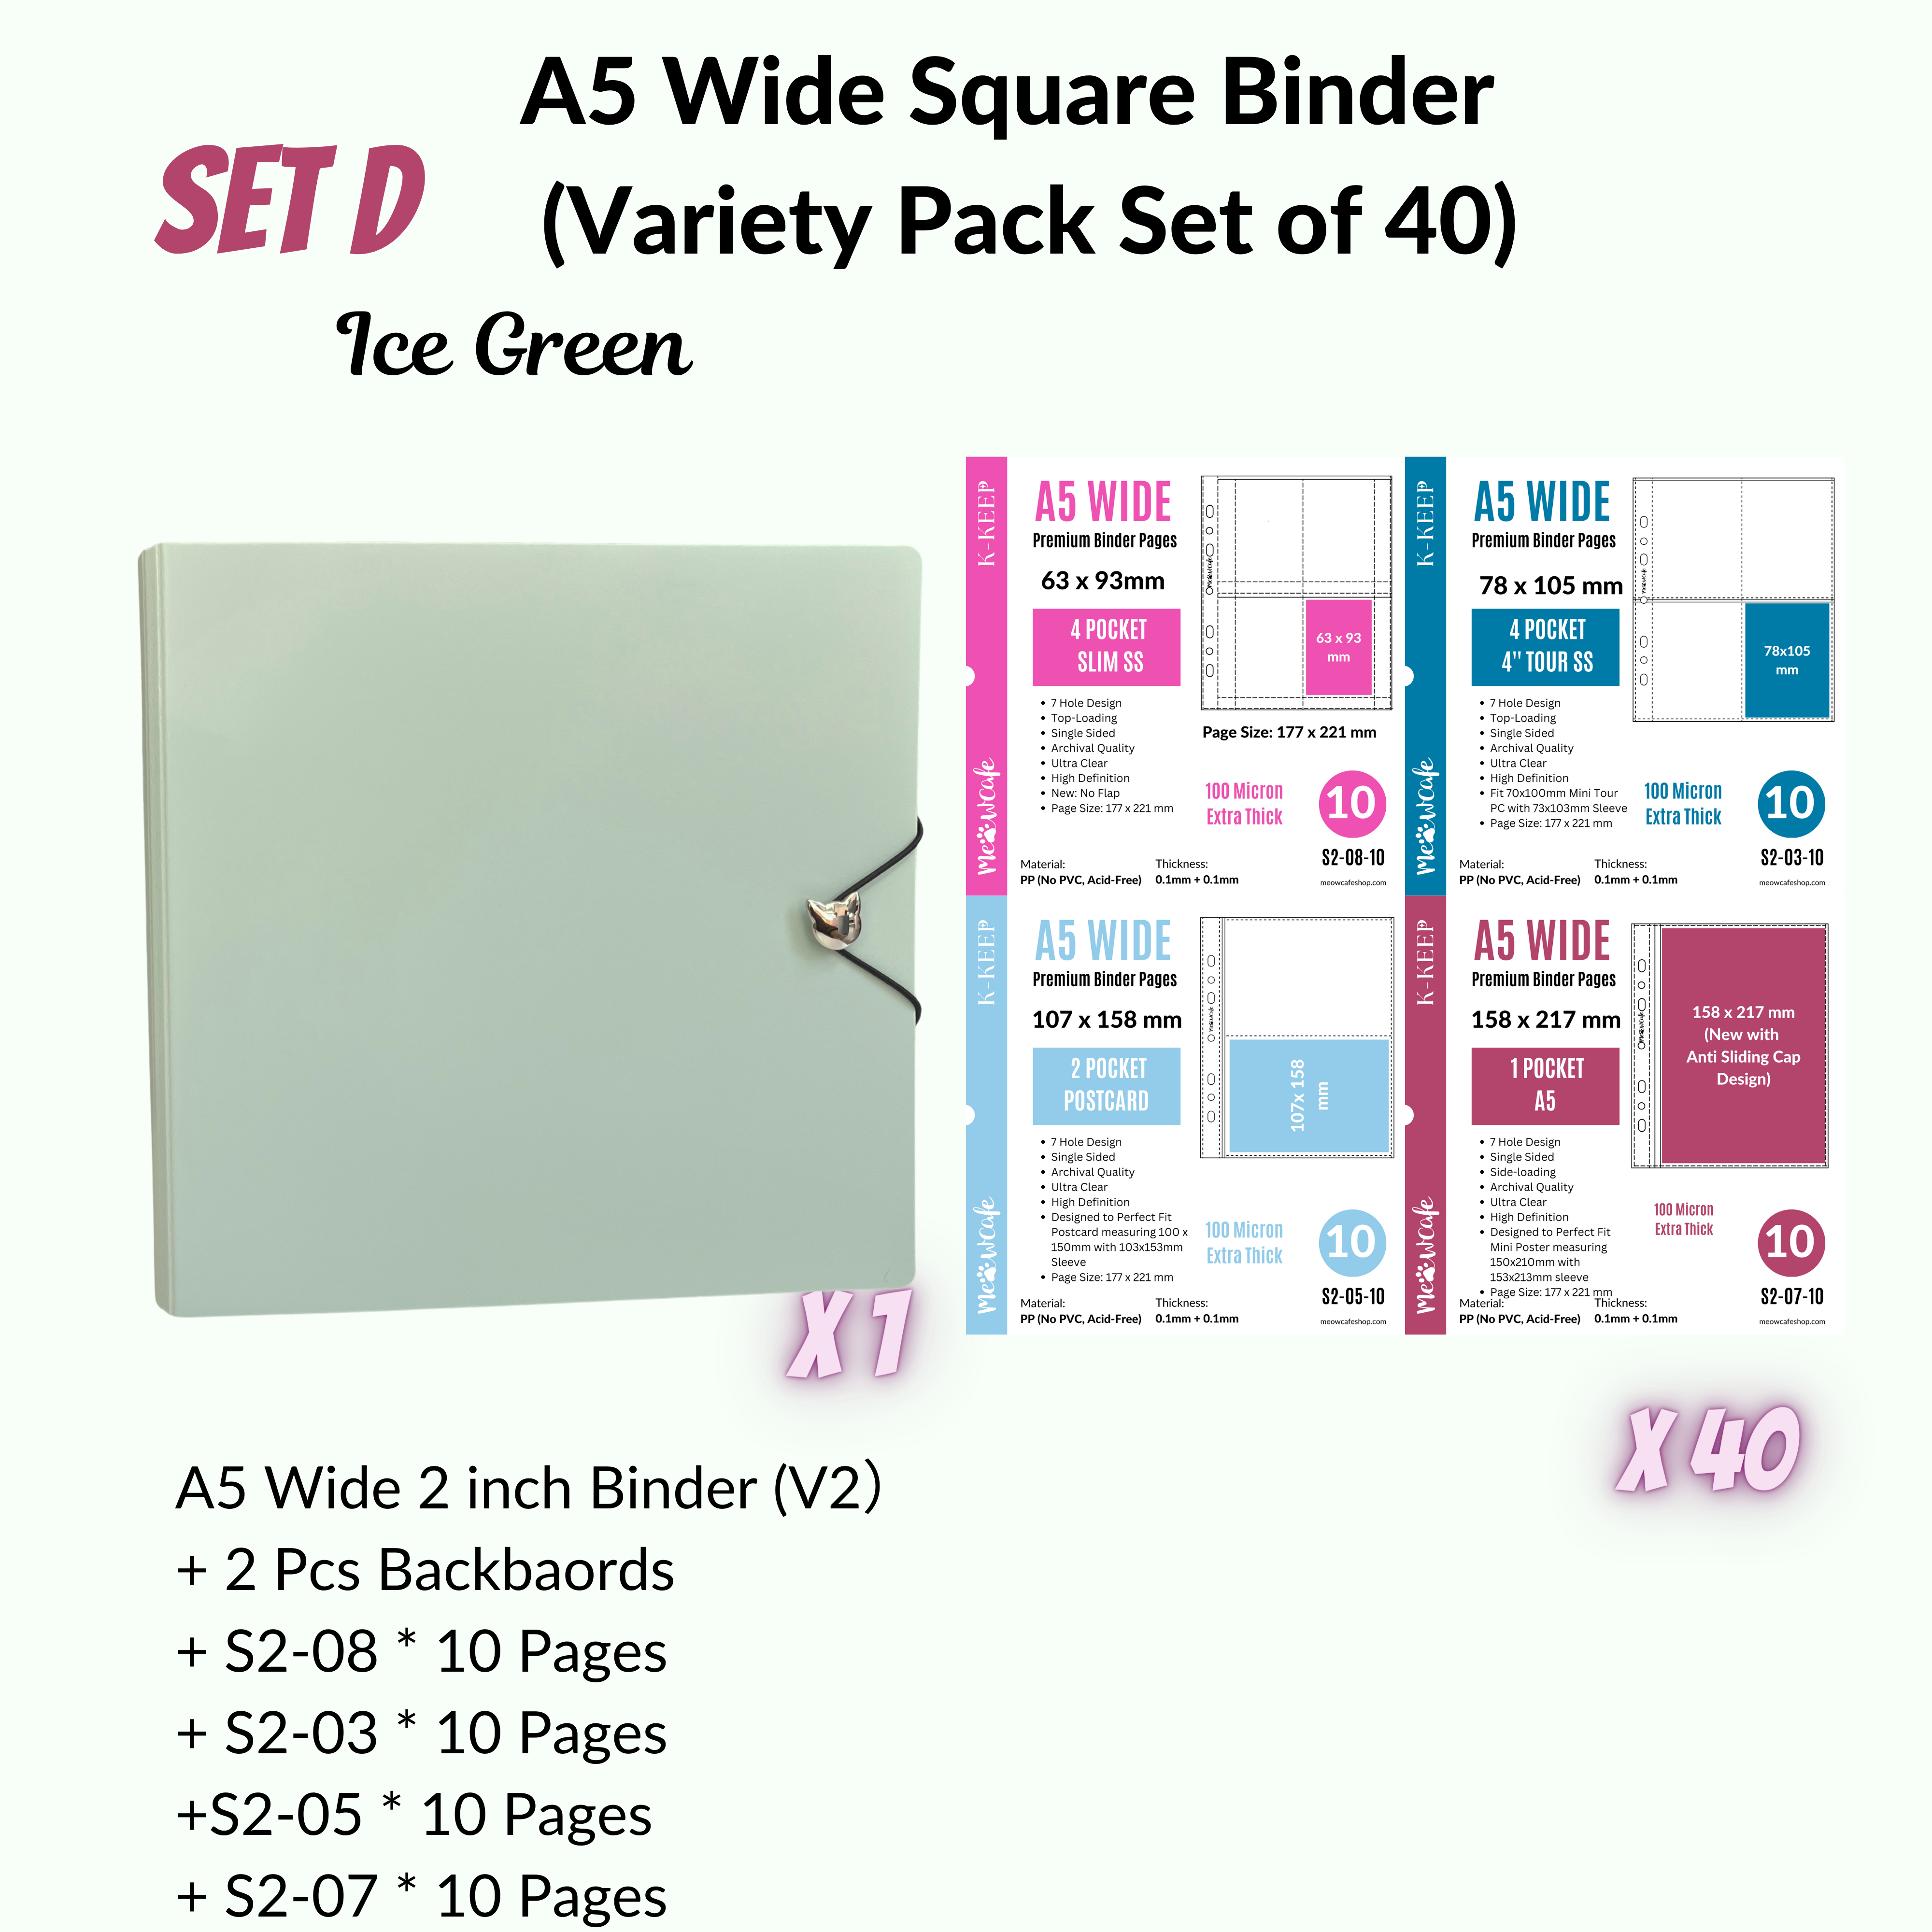 K-KEEP [A5 Wide]  - [2 inch] - [Minimalist Series]  - The Most Comprehensive and Largest A5 Binder Specially Designed for Kpop Collector - Ice Green